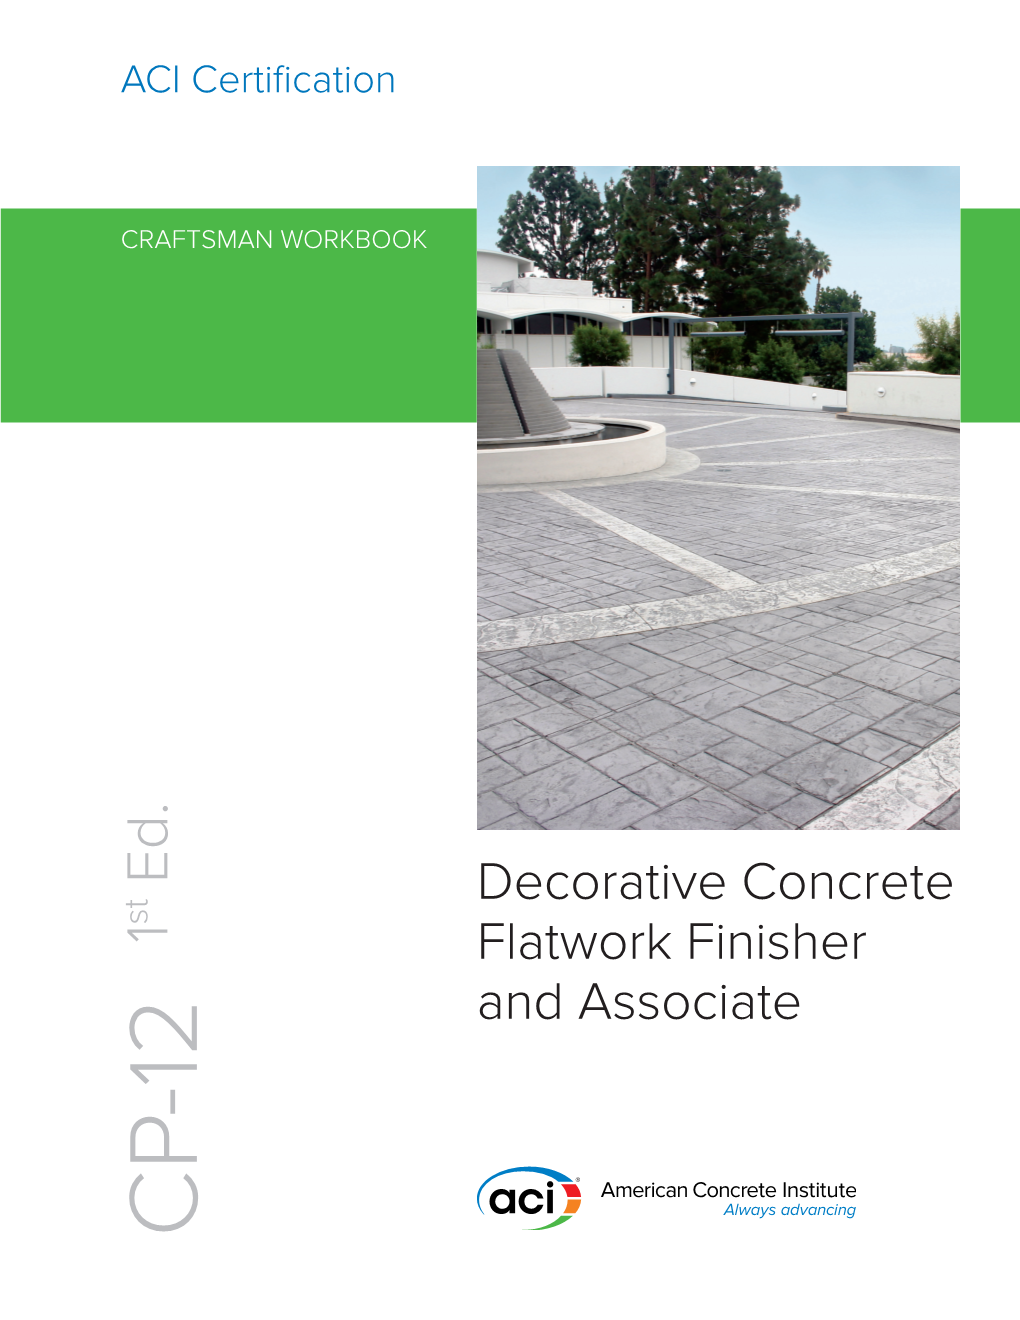 Decorative Concrete Flatwork Finisher and Associate Reported by ACI Certification Programs Committee Joe Hug, Chair Bryan R